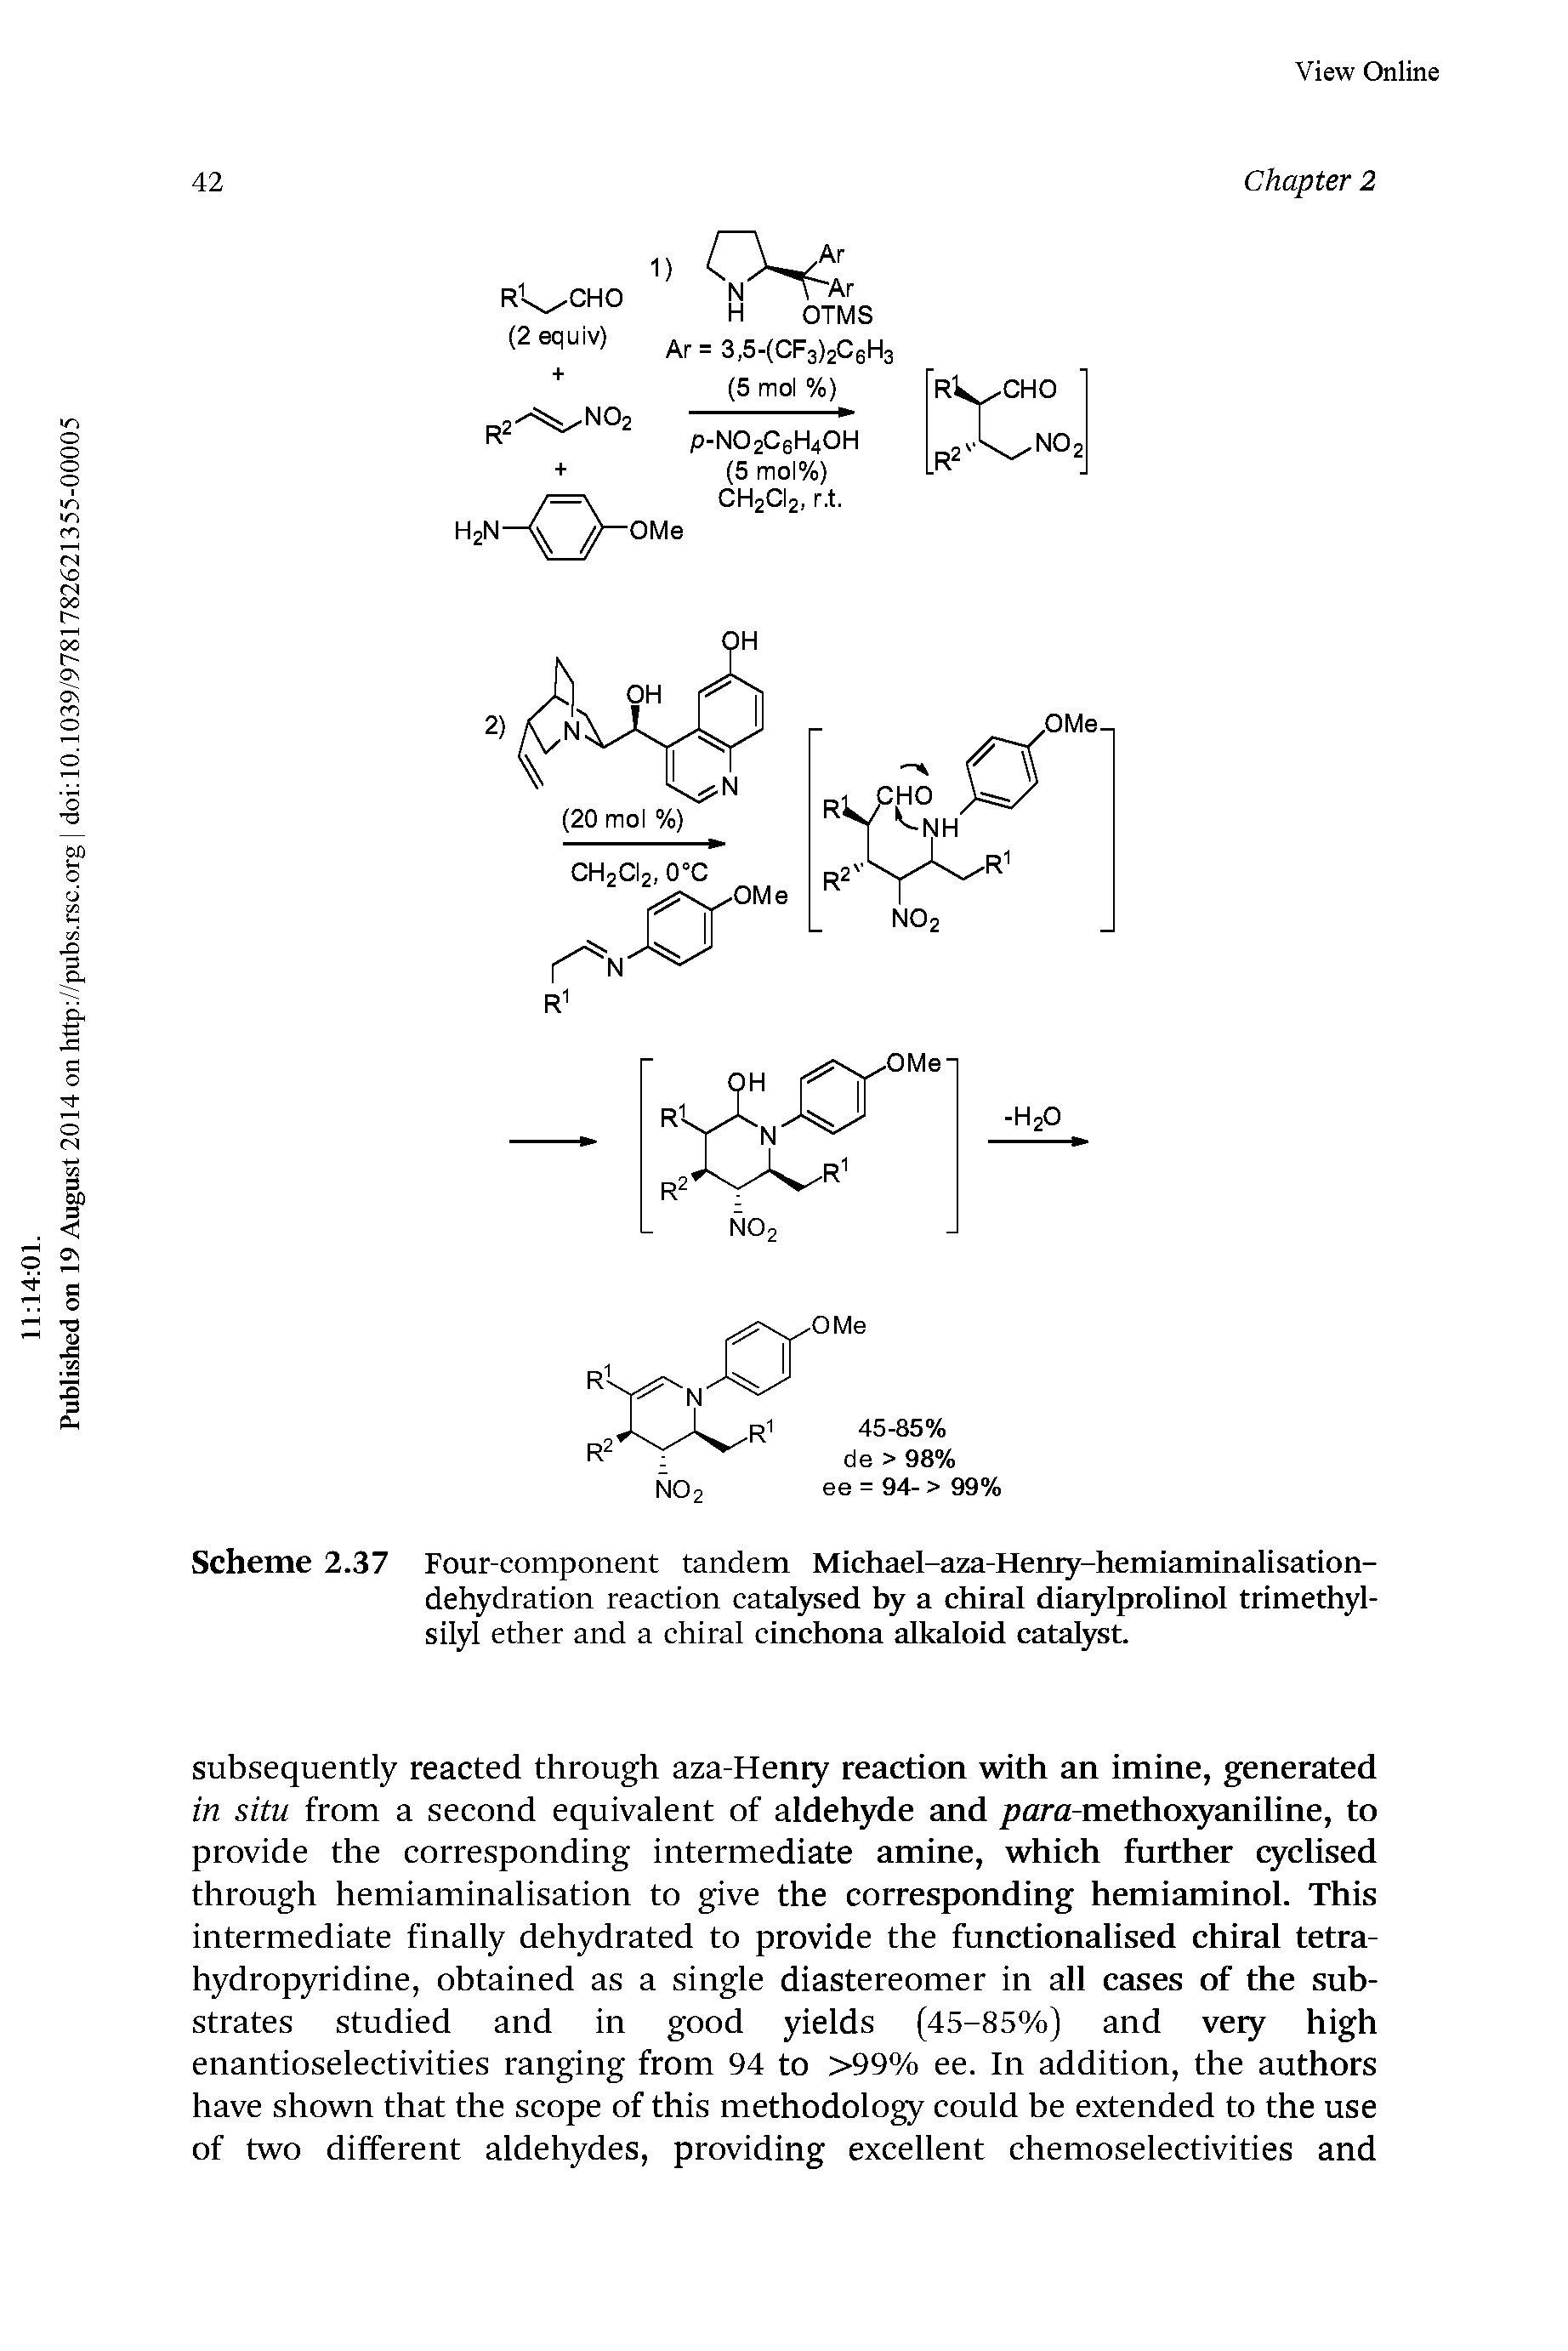 Scheme 2.37 Four-component tandem Michael-aza-Henry-hemiaminalisation-dehydration reaction catatysed by a chiral diaiylprolinol trimethyl-silyl ether and a chiral cinchona alkaloid catalyst.